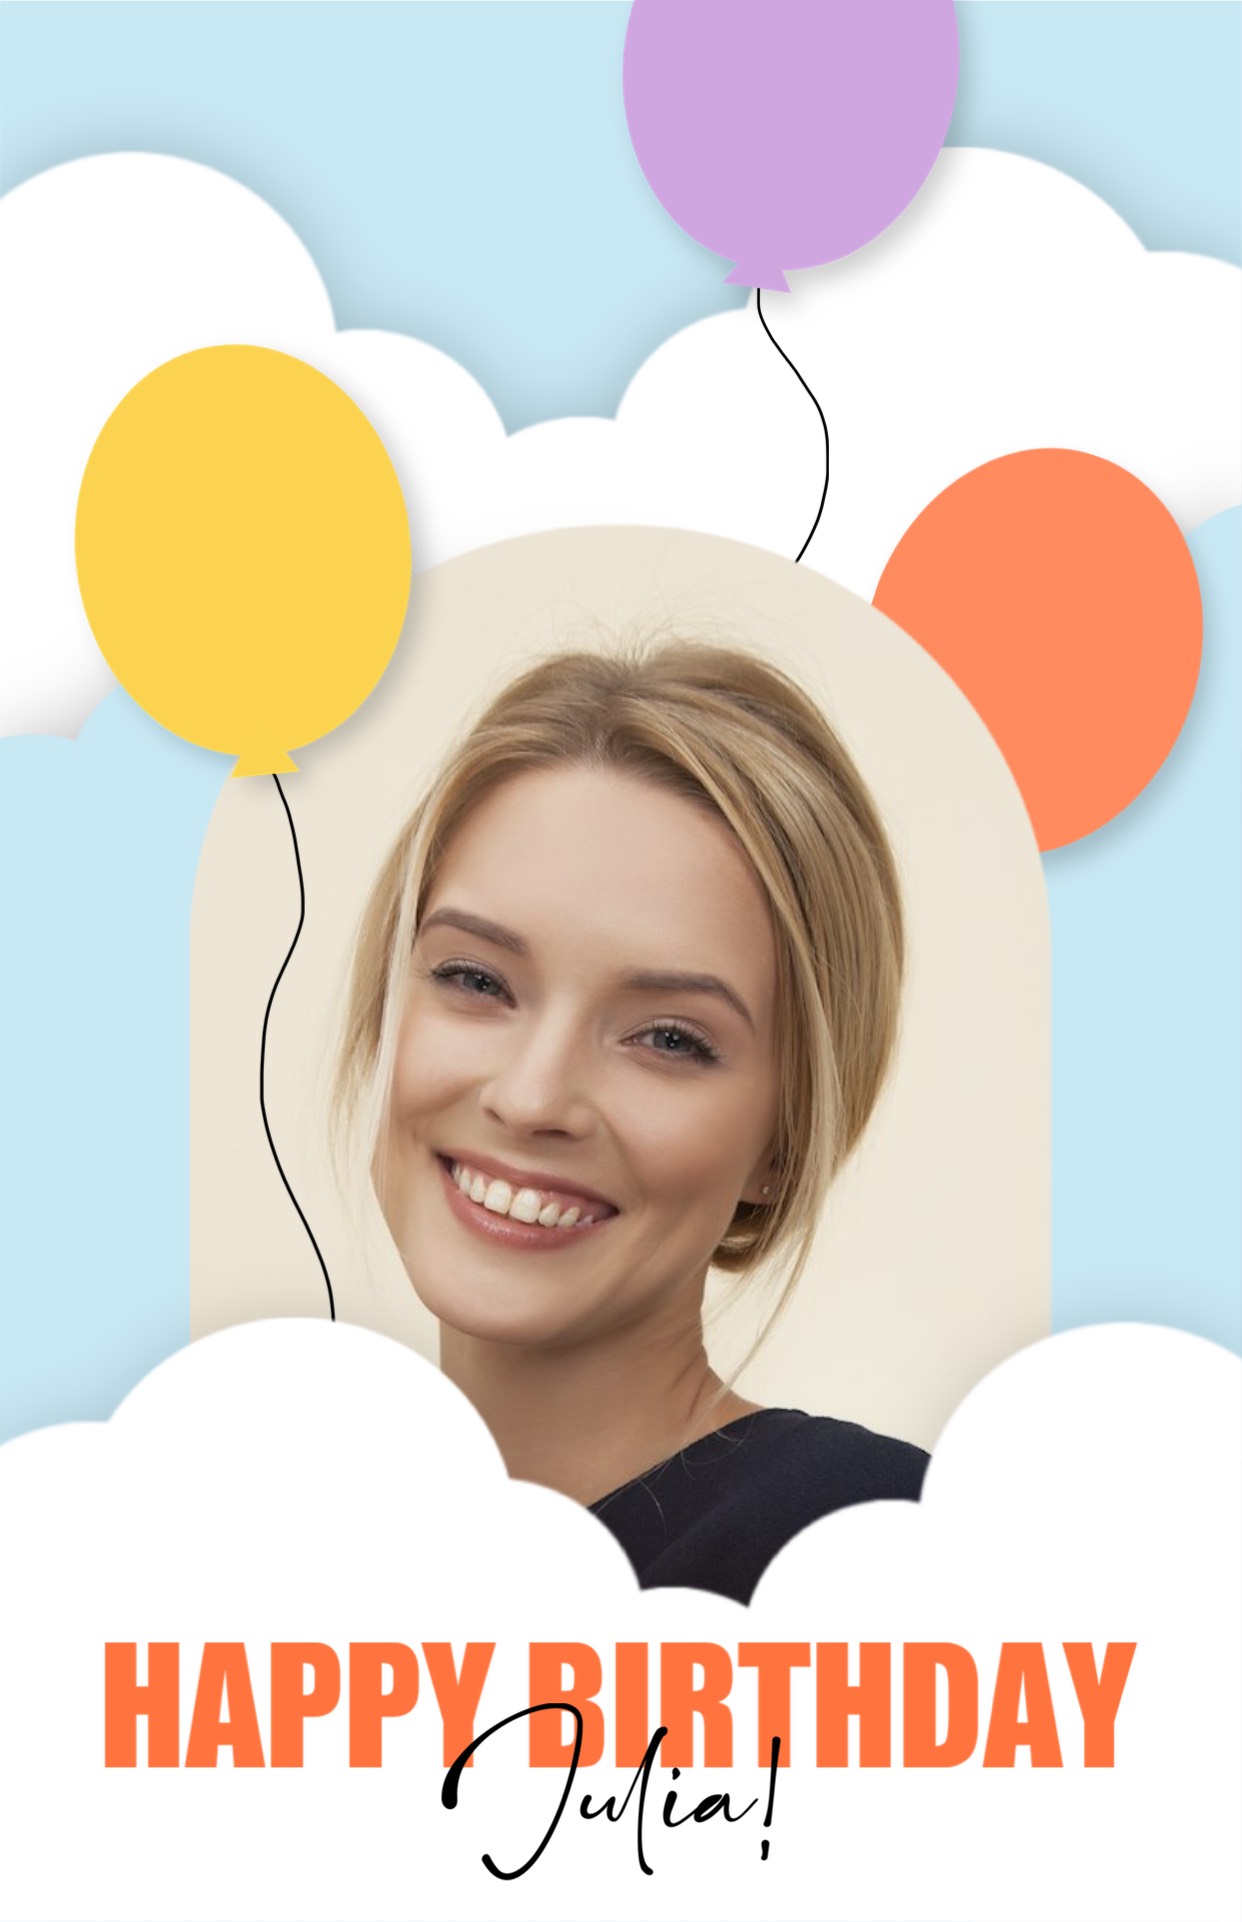 balloons and clouds birthday greeting card photo template